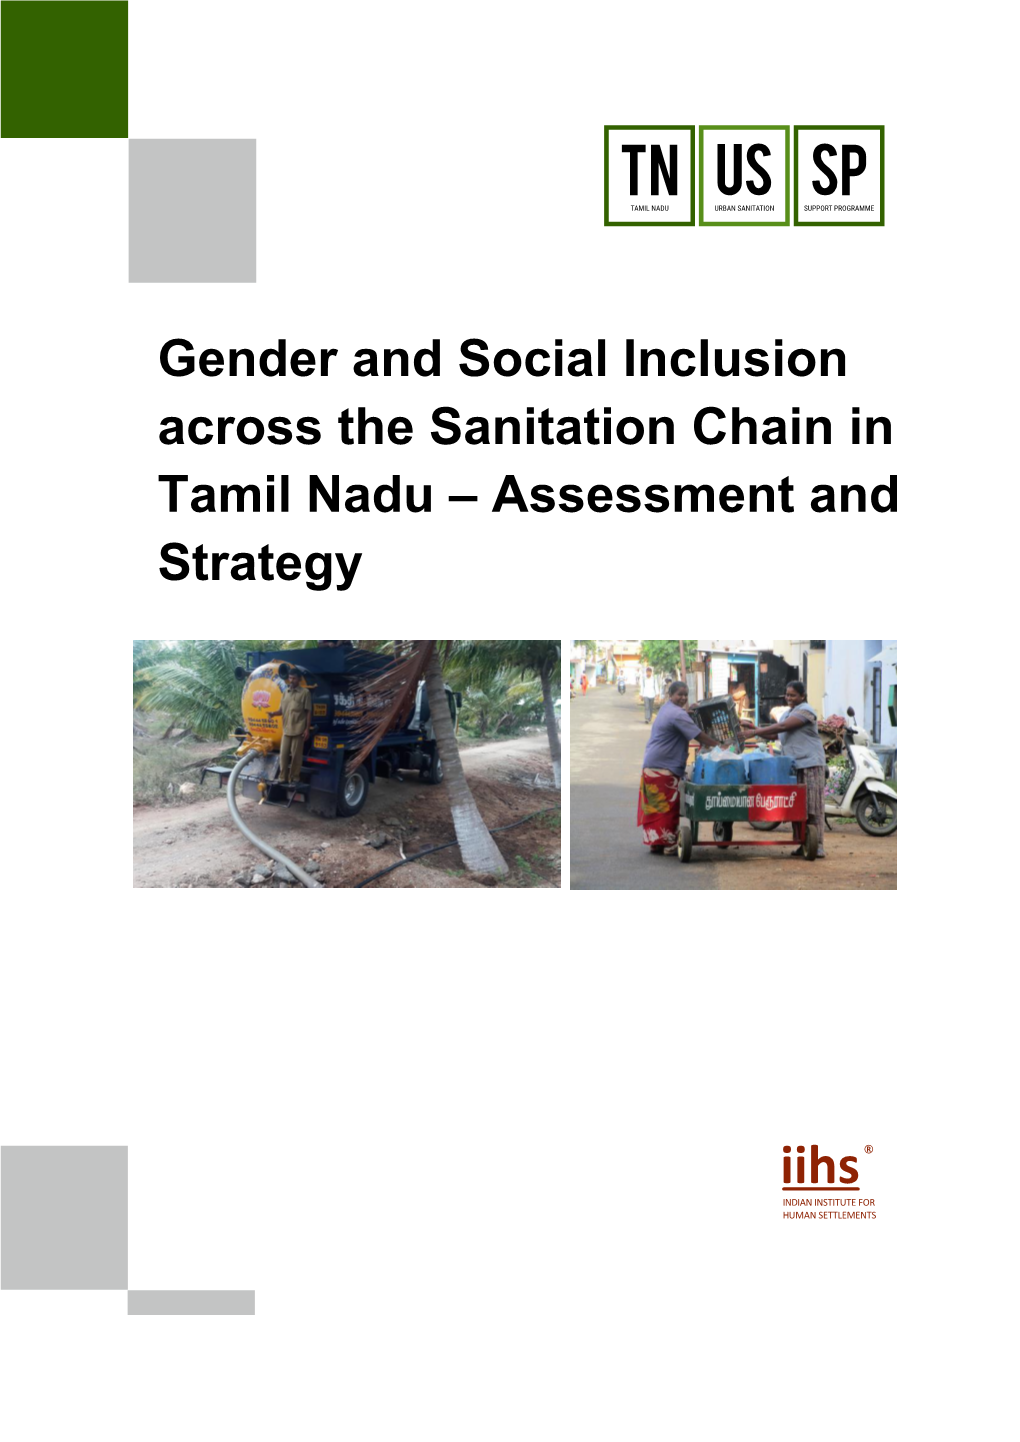 File Gender and Social Inclusion Across the Sanitation Chain In